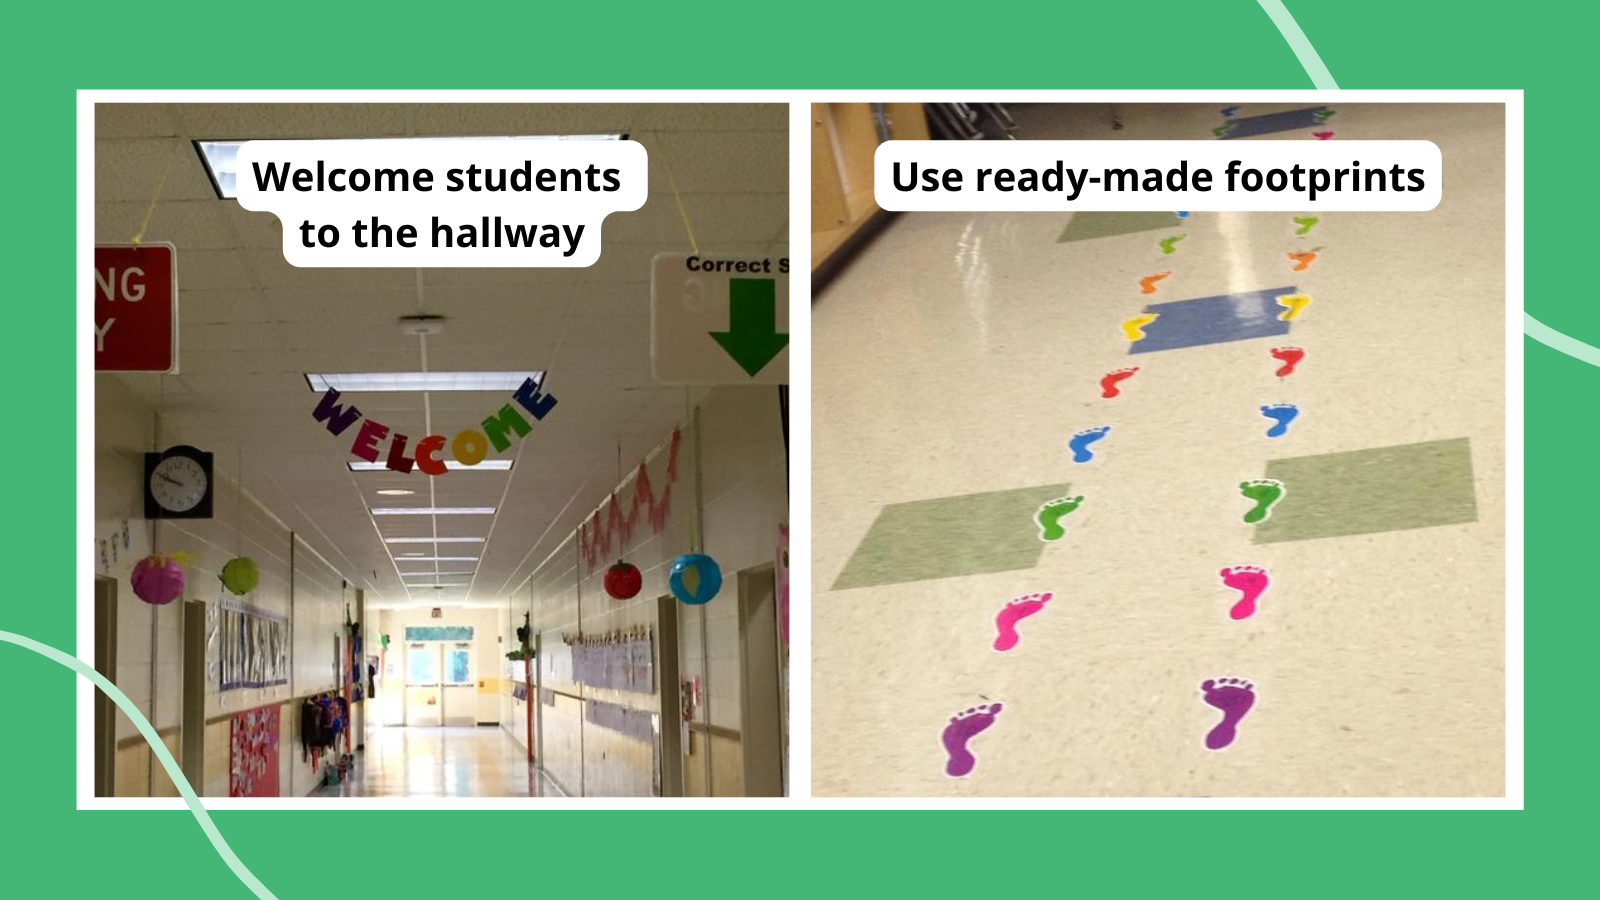 Examples of lining up strategies including foot print stickers on the floor and creating a welcoming hallway with reminders